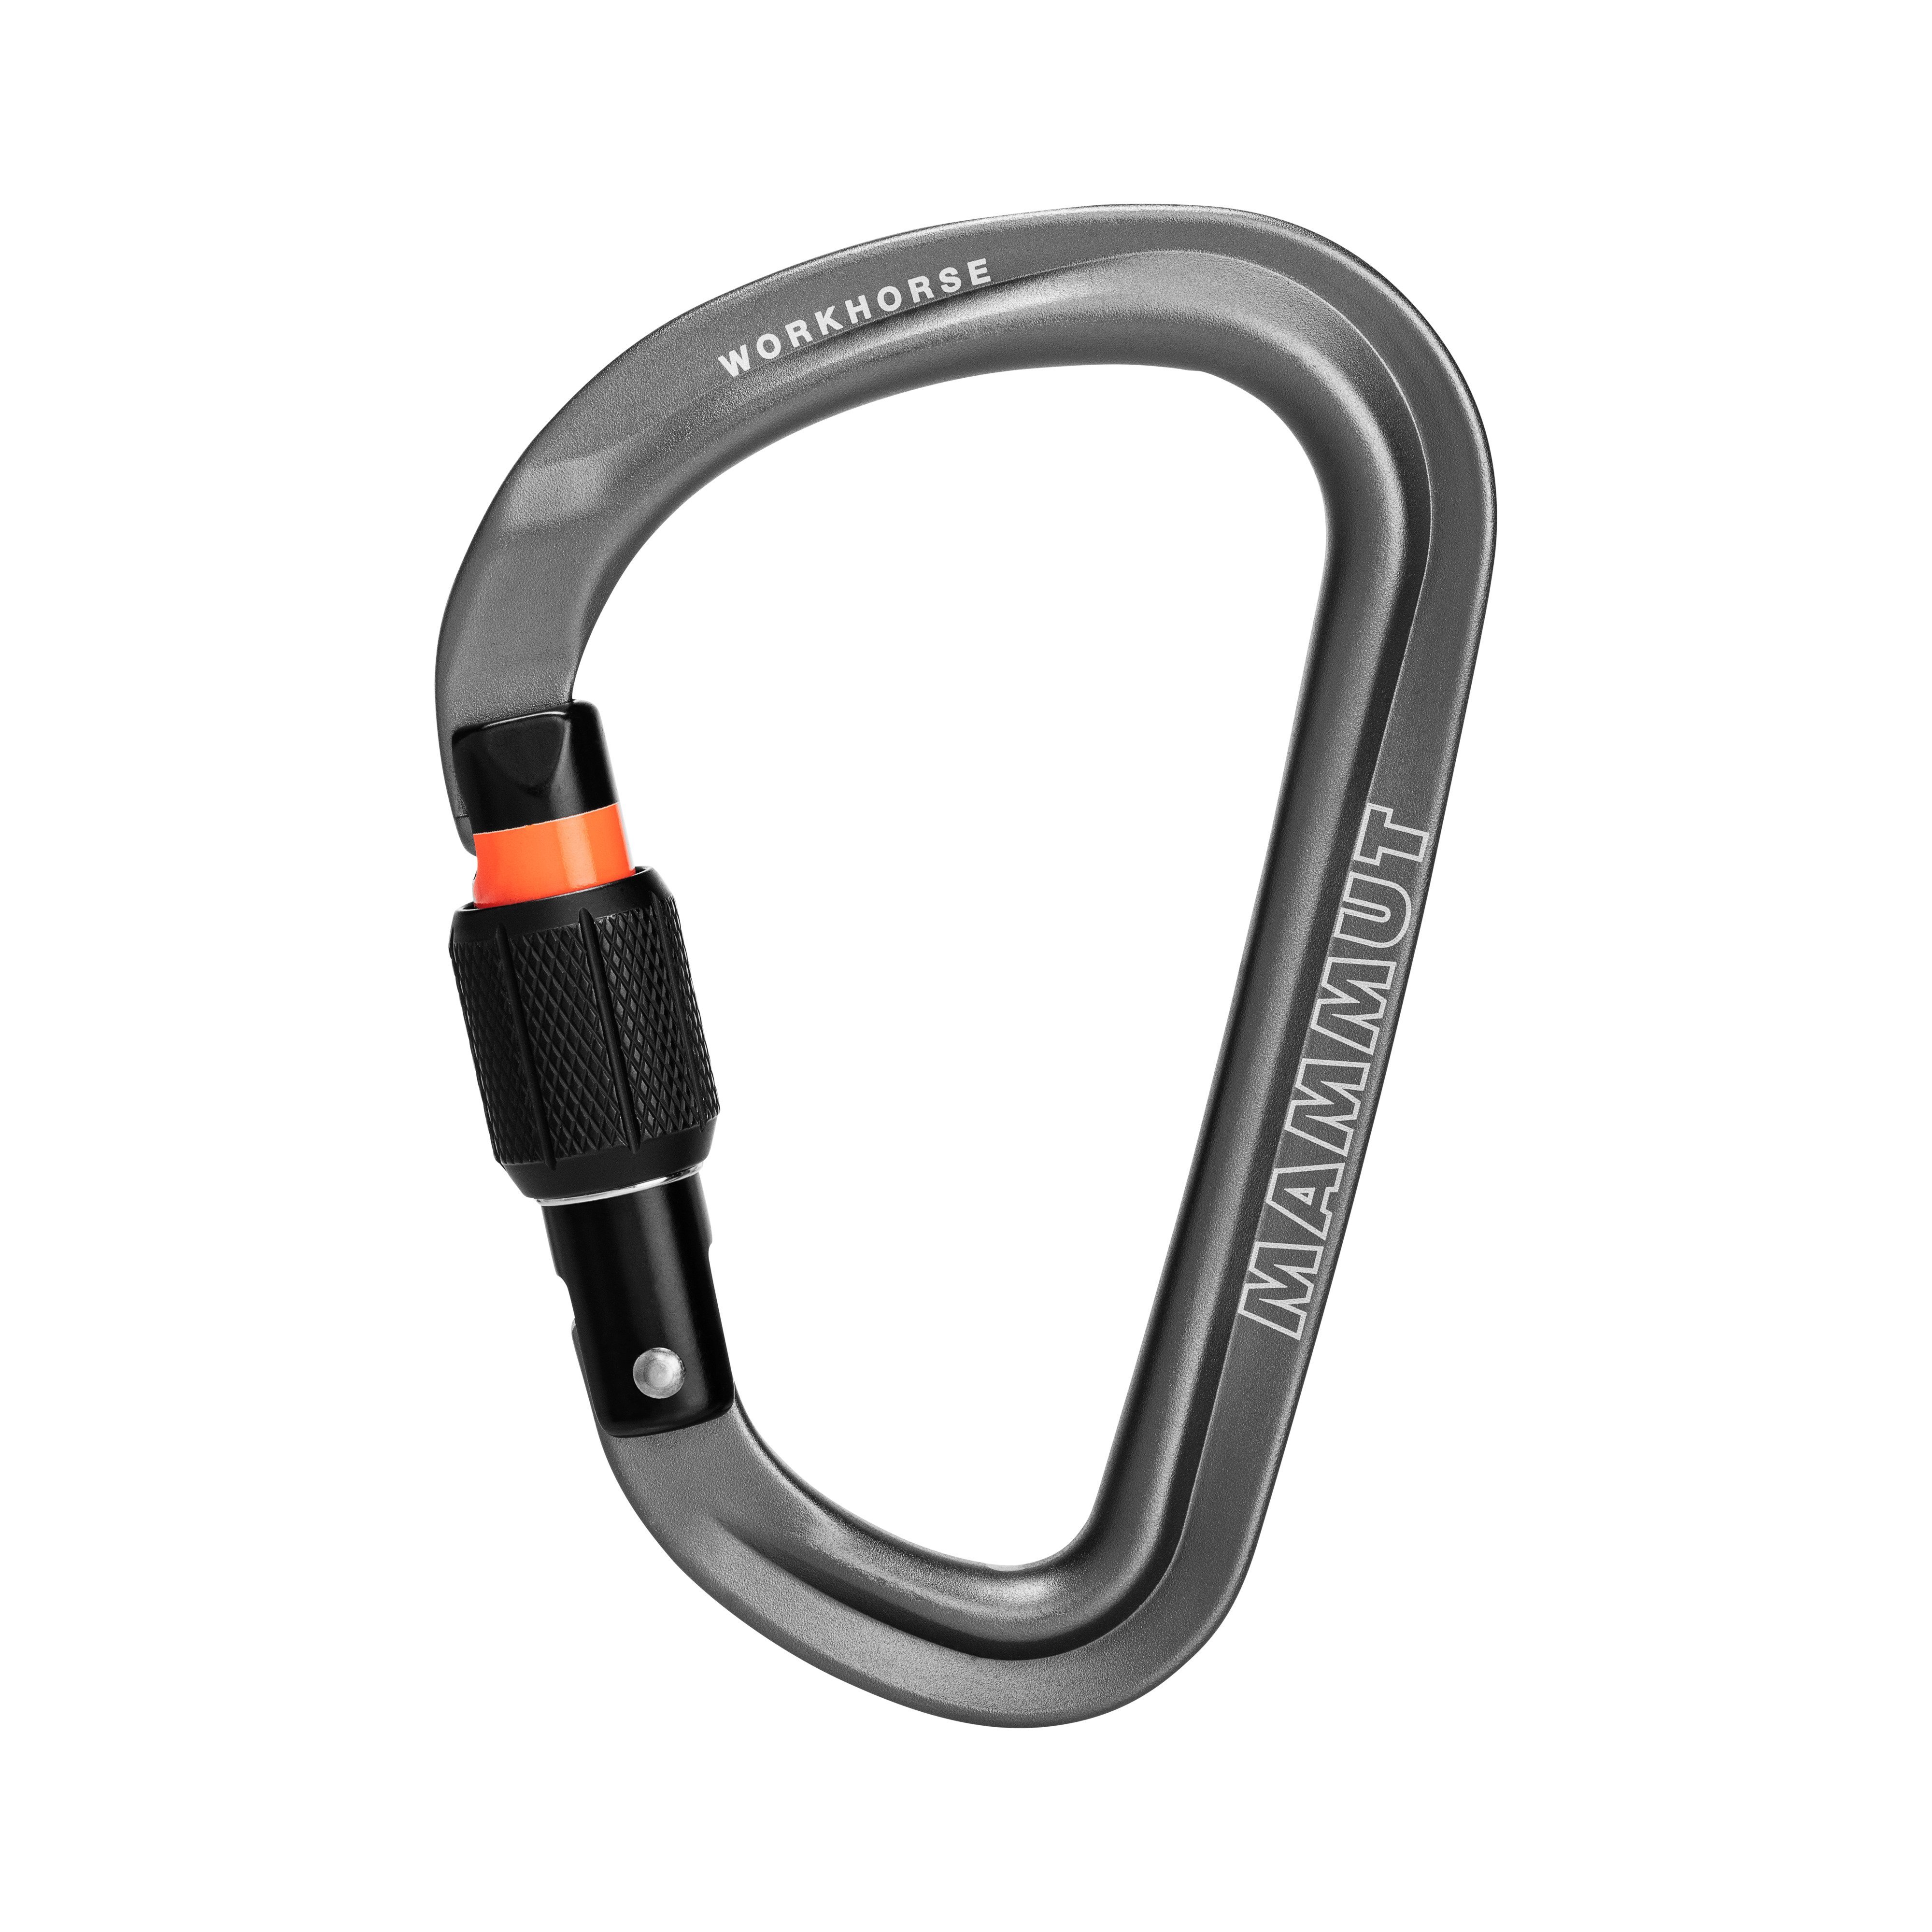 Workhorse HMS Screwgate Carabiner - one size product image